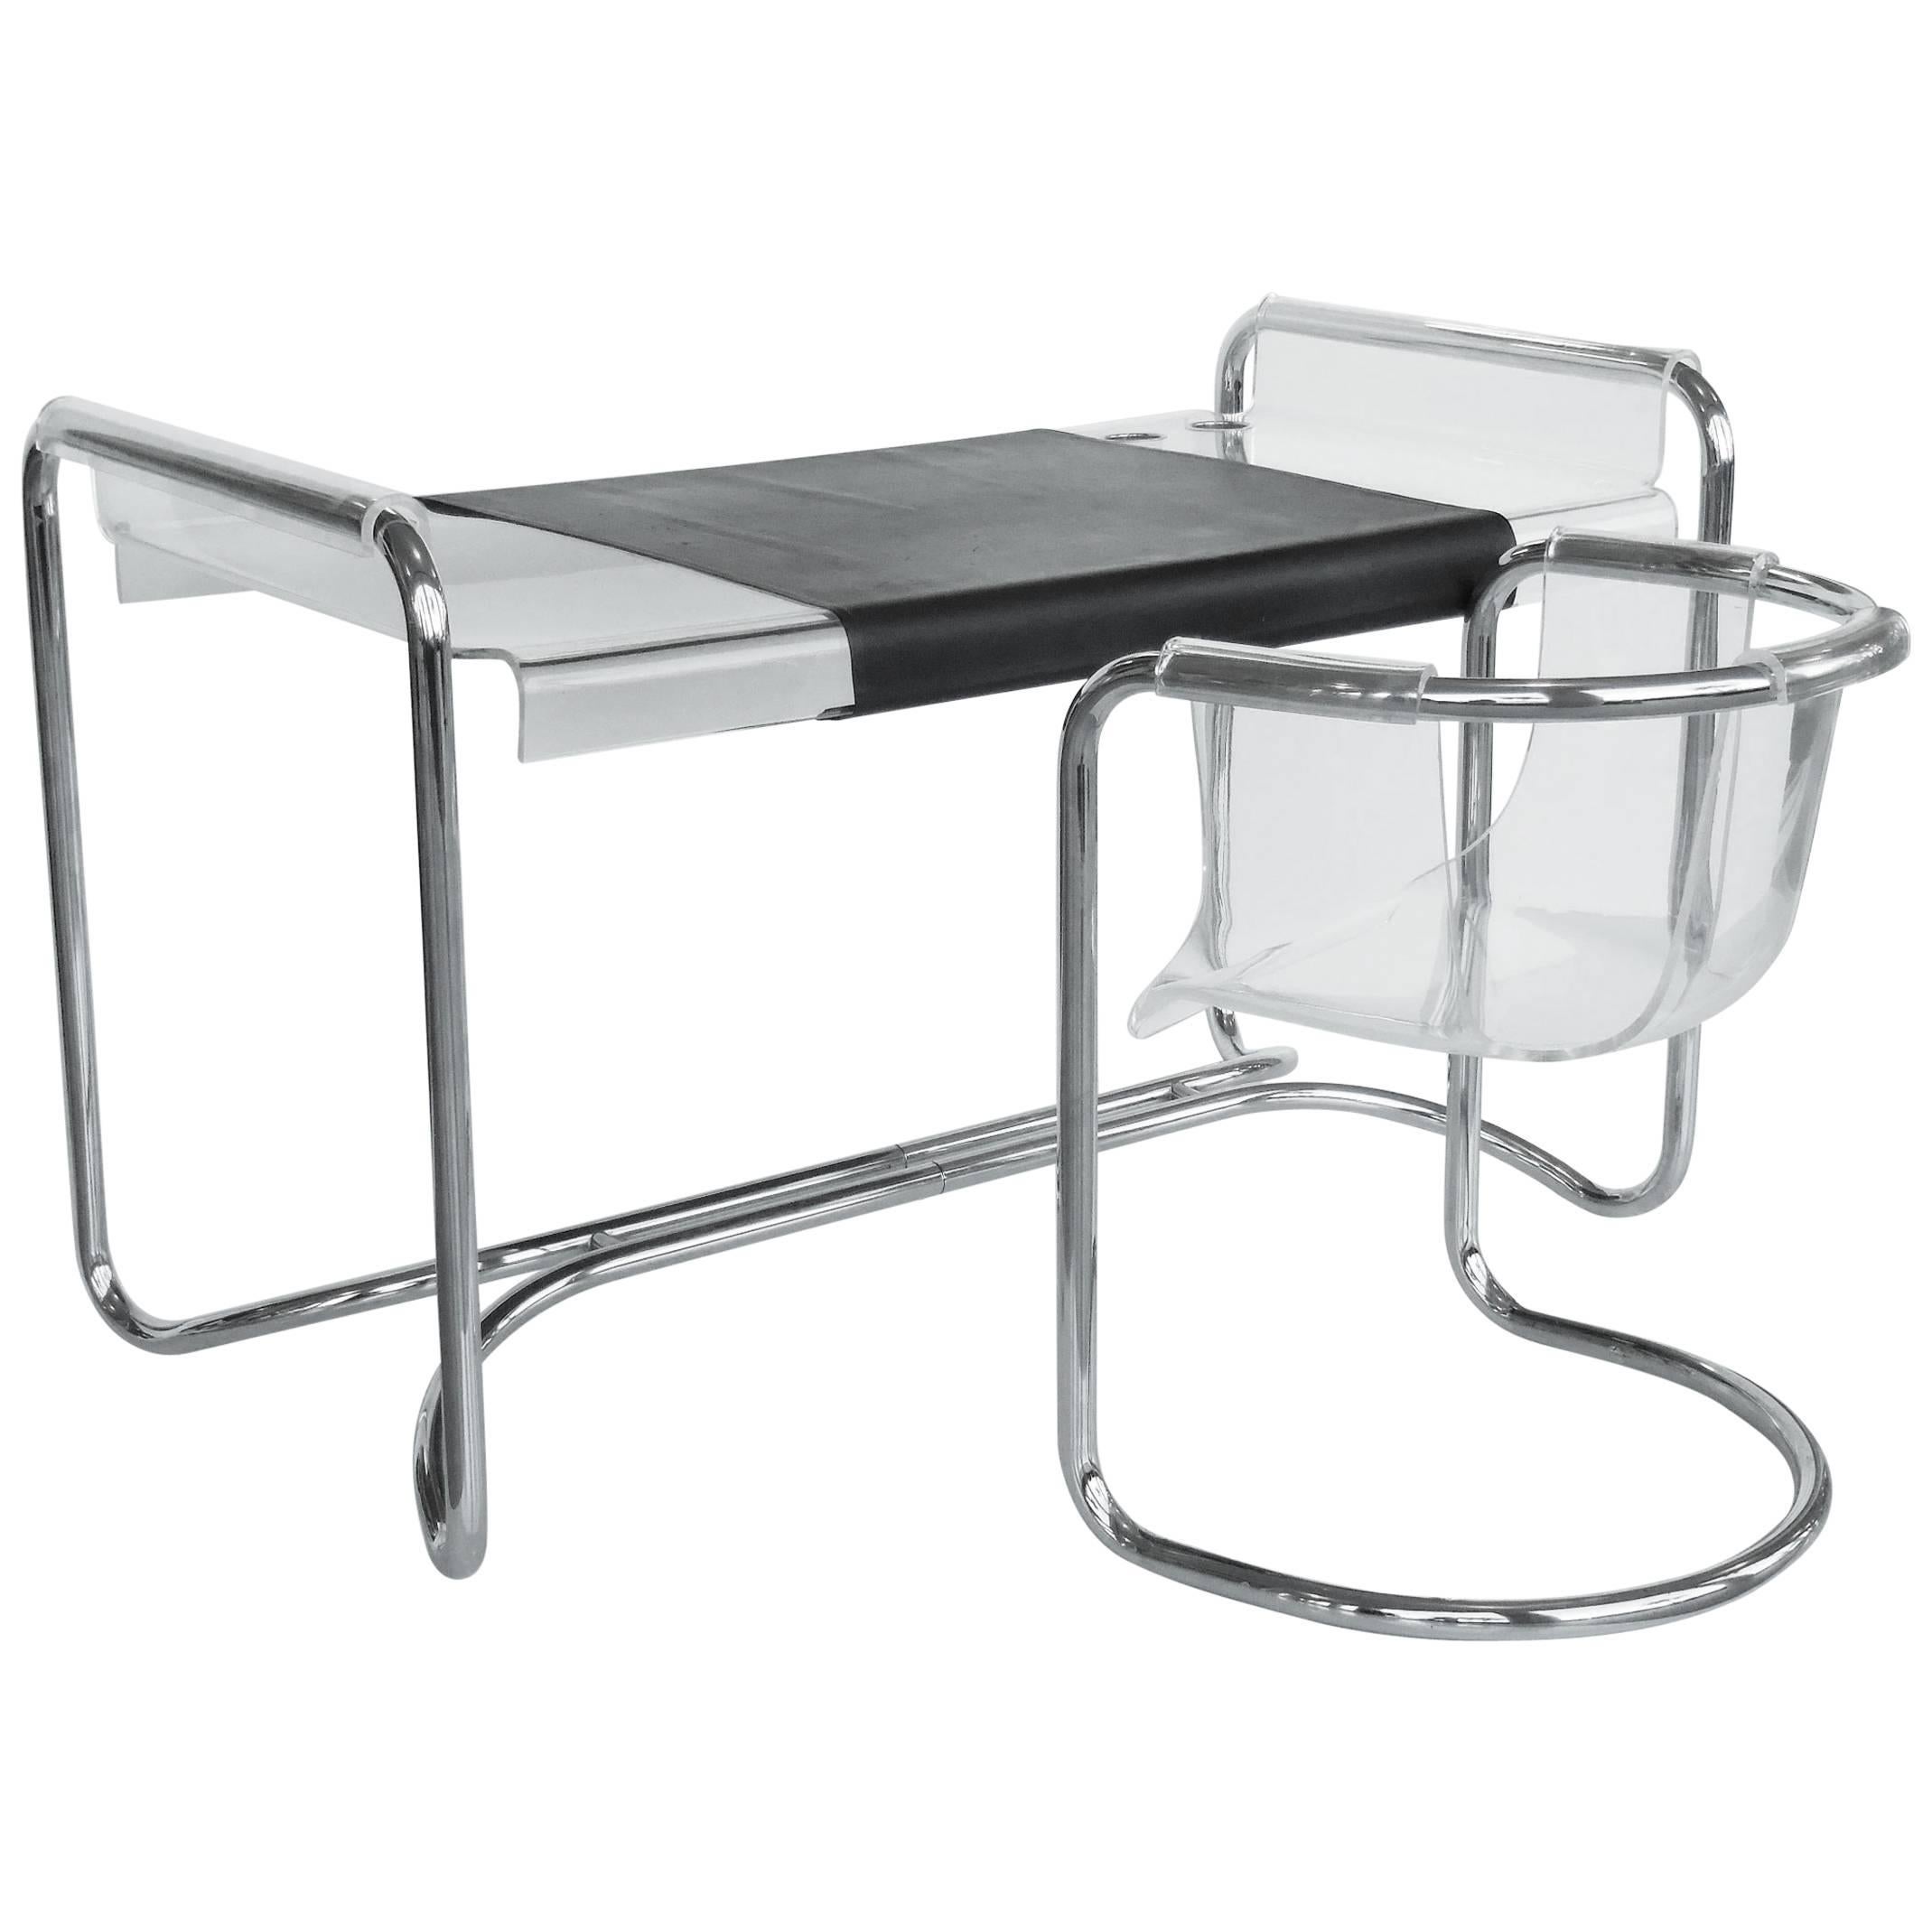 Fabio Lenci Lucite and Chrome Desk with Two Chairs